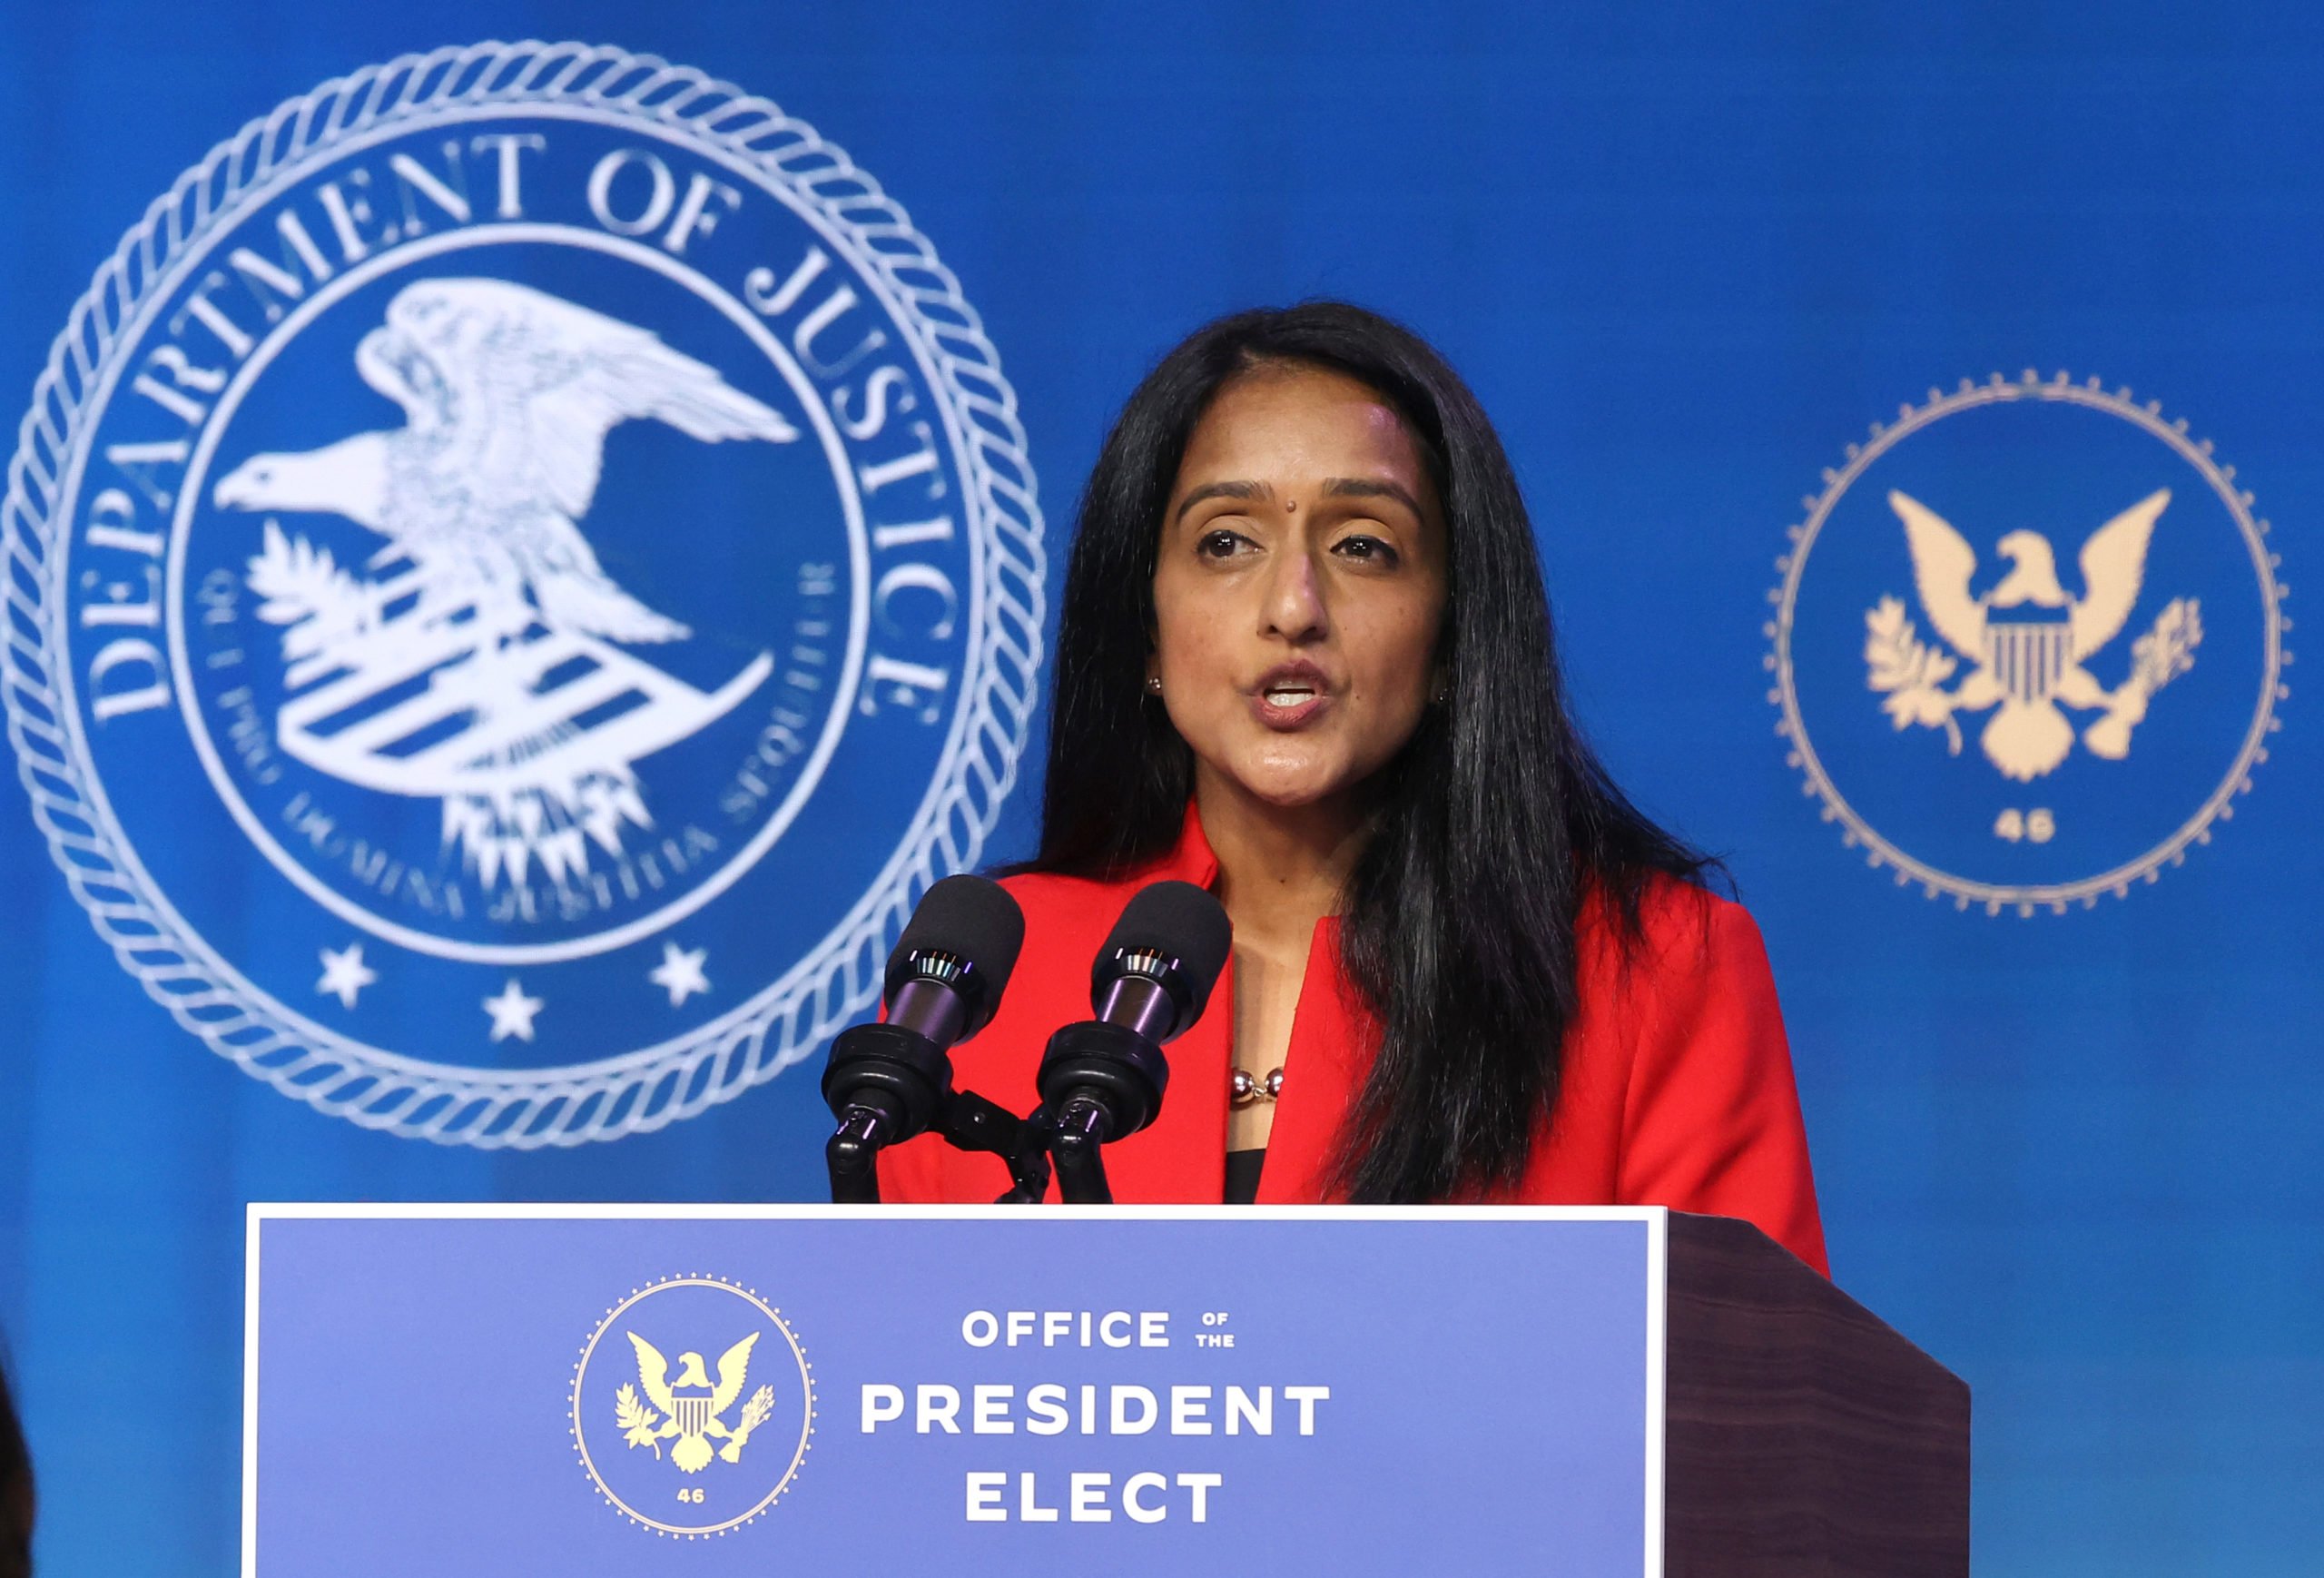 WILMINGTON, DELAWARE - JANUARY 07: Vanita Gupta delivers remarks after being nominated to be U.S. associate attorney general by President-elect Joe Biden at The Queen theater January 07, 2021 in Wilmington, Delaware. From 2014 to 2017 Gupta served as the head of the Justice Department’s Civil Rights Division during the Obama Administration. (Photo by Chip Somodevilla/Getty Images)